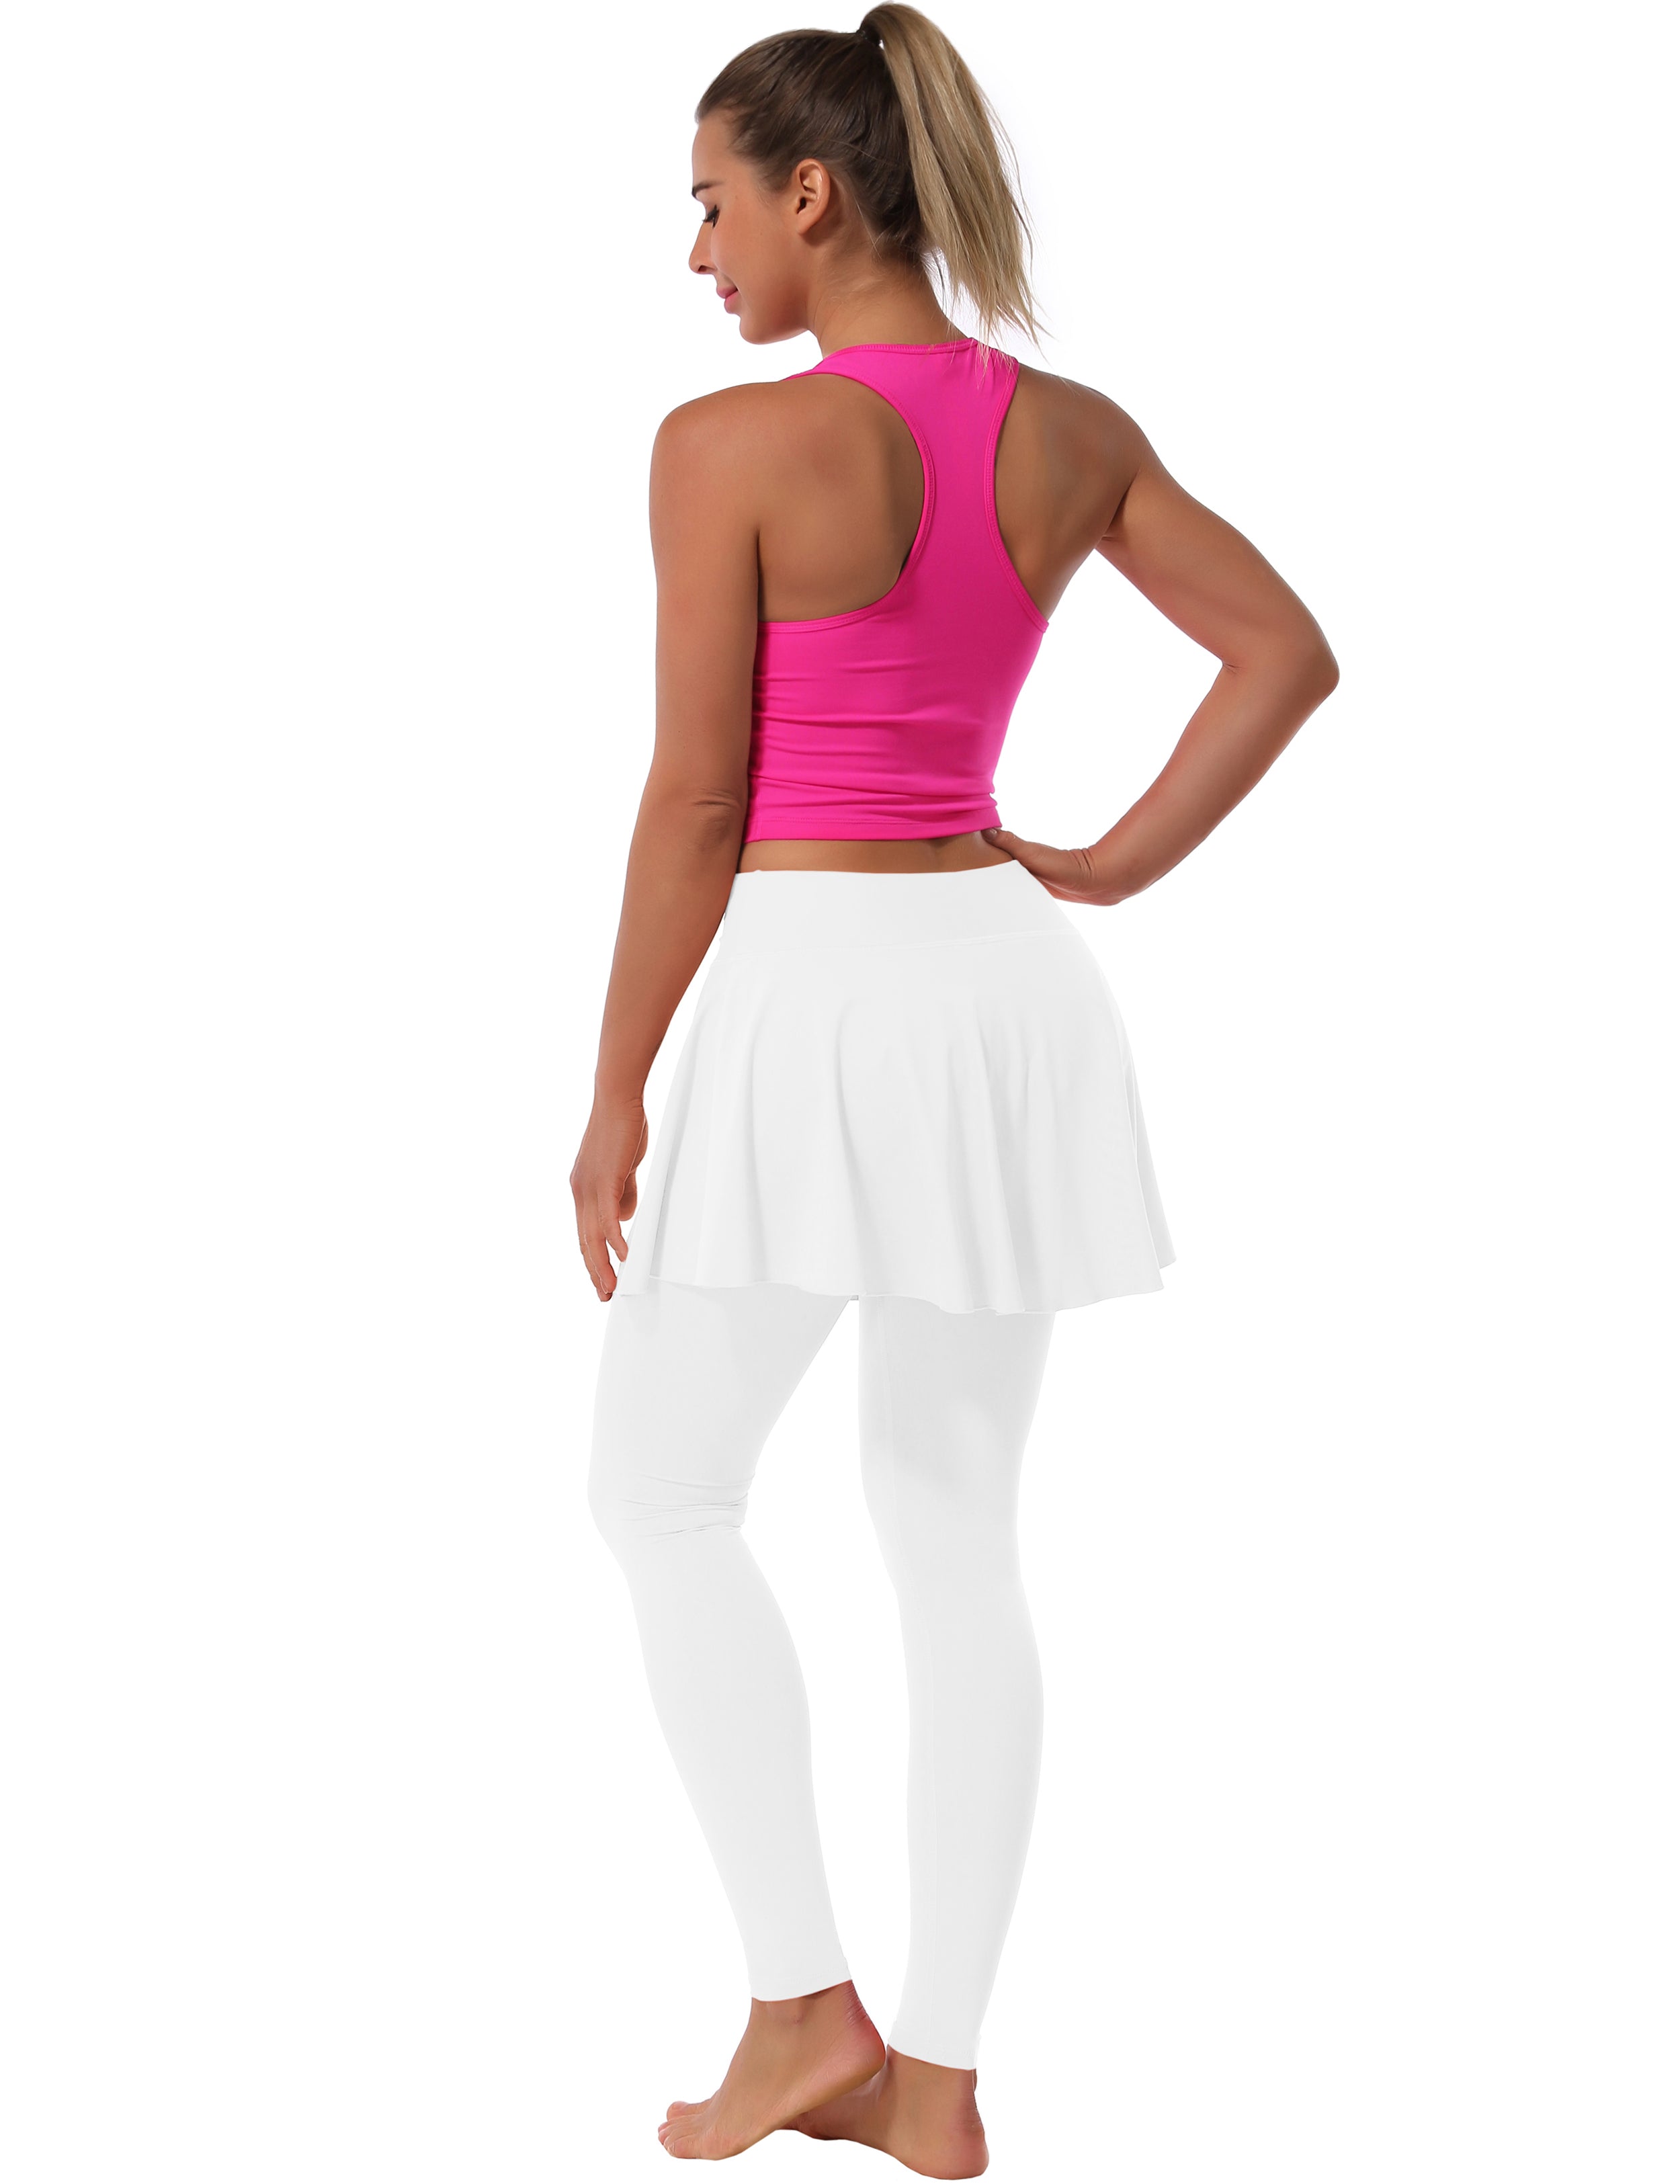 Athletic Tennis Golf Skort with Pocket Shorts white 80%Nylon/20%Spandex UPF 50+ sun protection Elastic closure Lightweight, Wrinkle Moisture wicking Quick drying Secure & comfortable two layer Hidden pocket